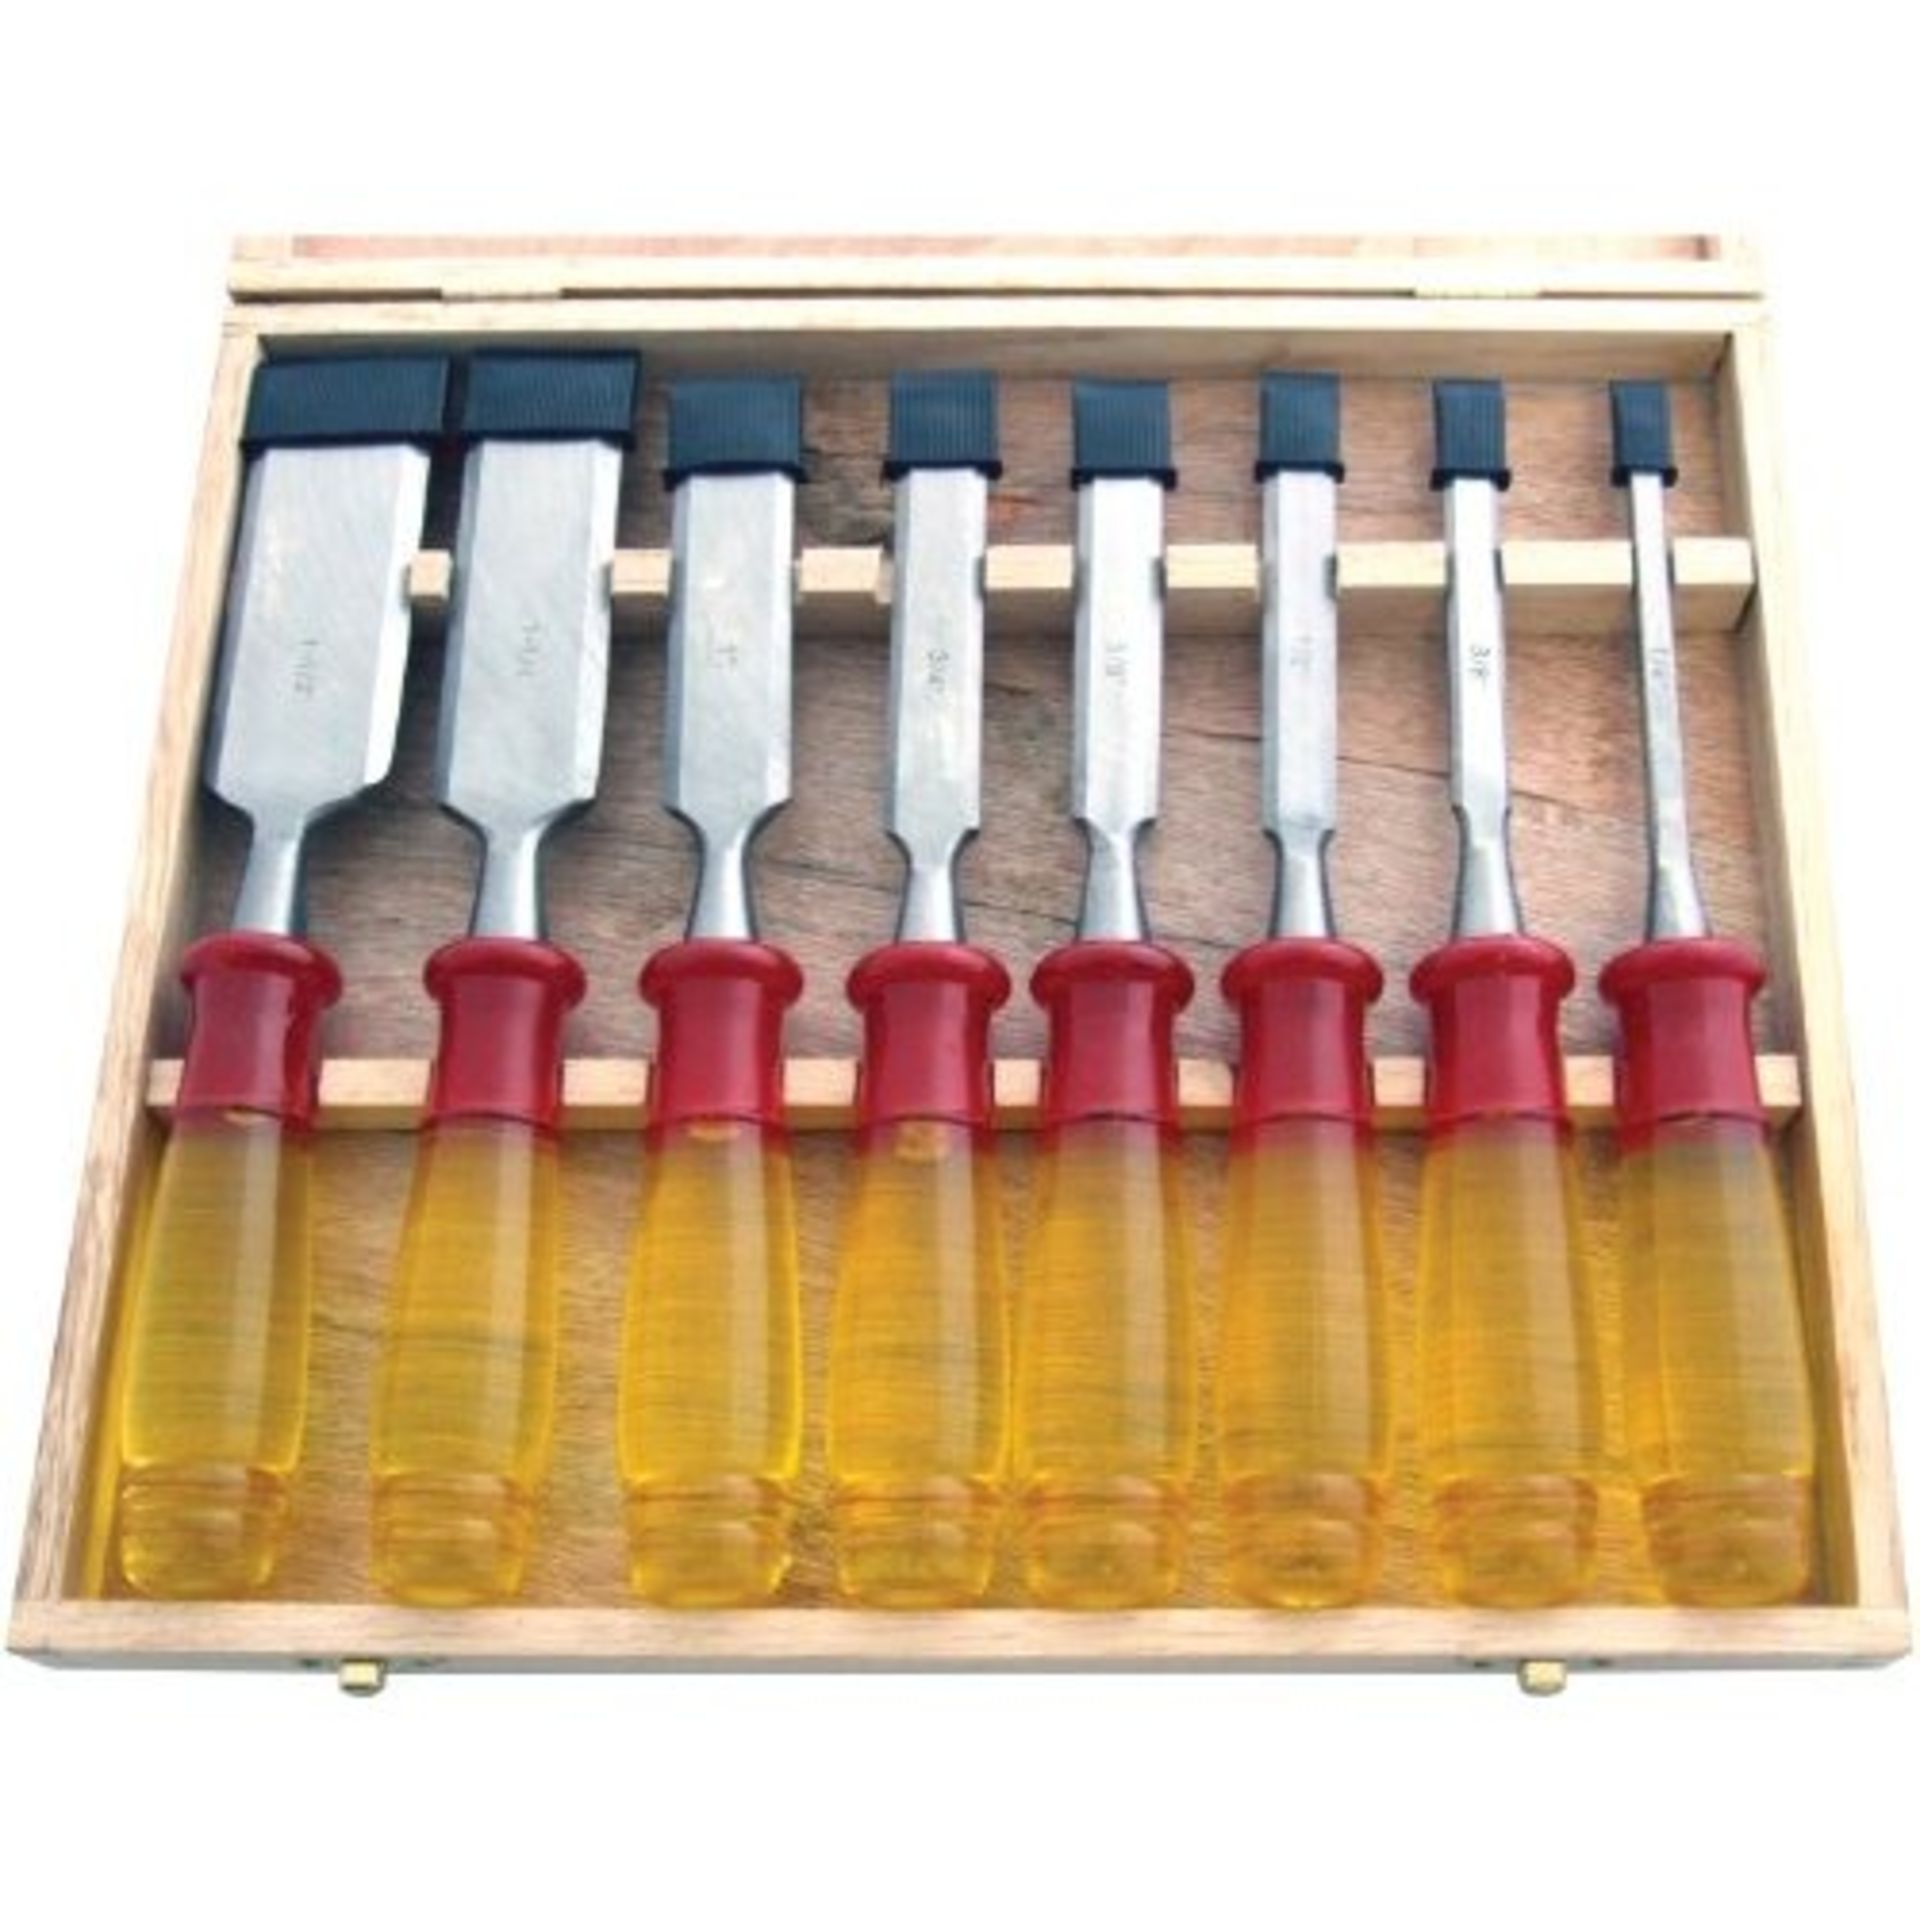 V Brand New Eight Piece Professional Chisel Set With Wooden Storage Case X 2 YOUR BID PRICE TO BE